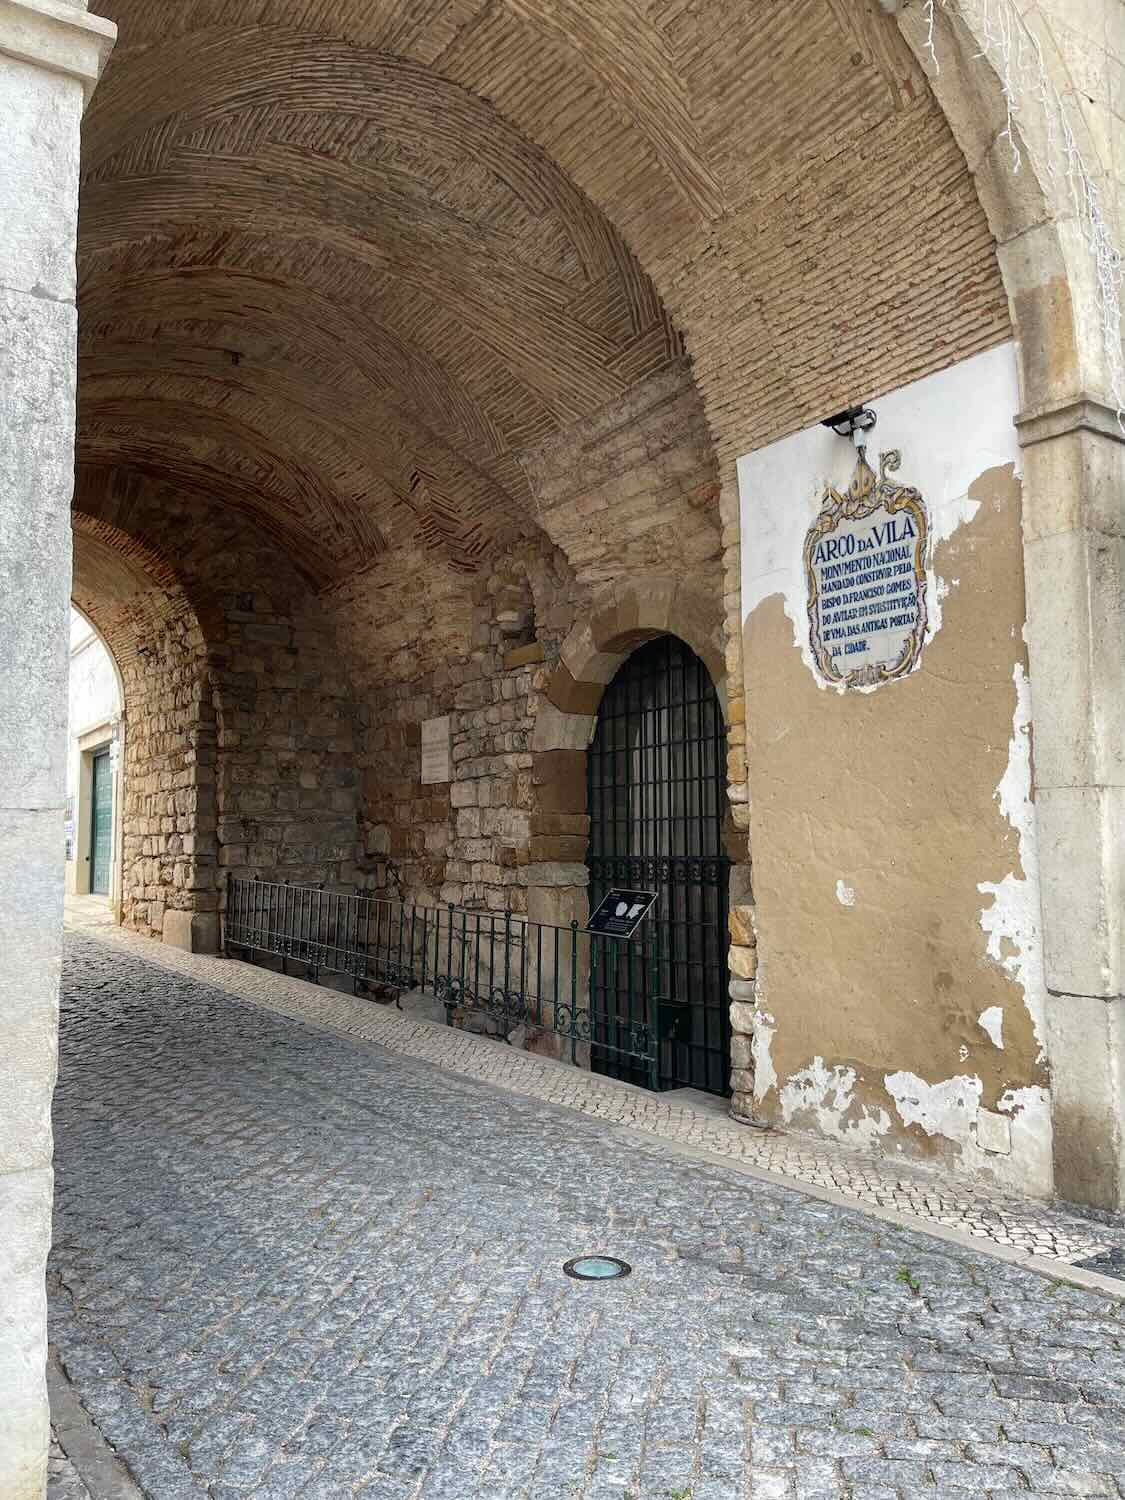 Arched stone gateway known as 'Arco da Vila' in Faro, with intricate brickwork ceiling and a historical plaque on the peeling plaster wall; cobblestone pavement adds to the historical ambiance.